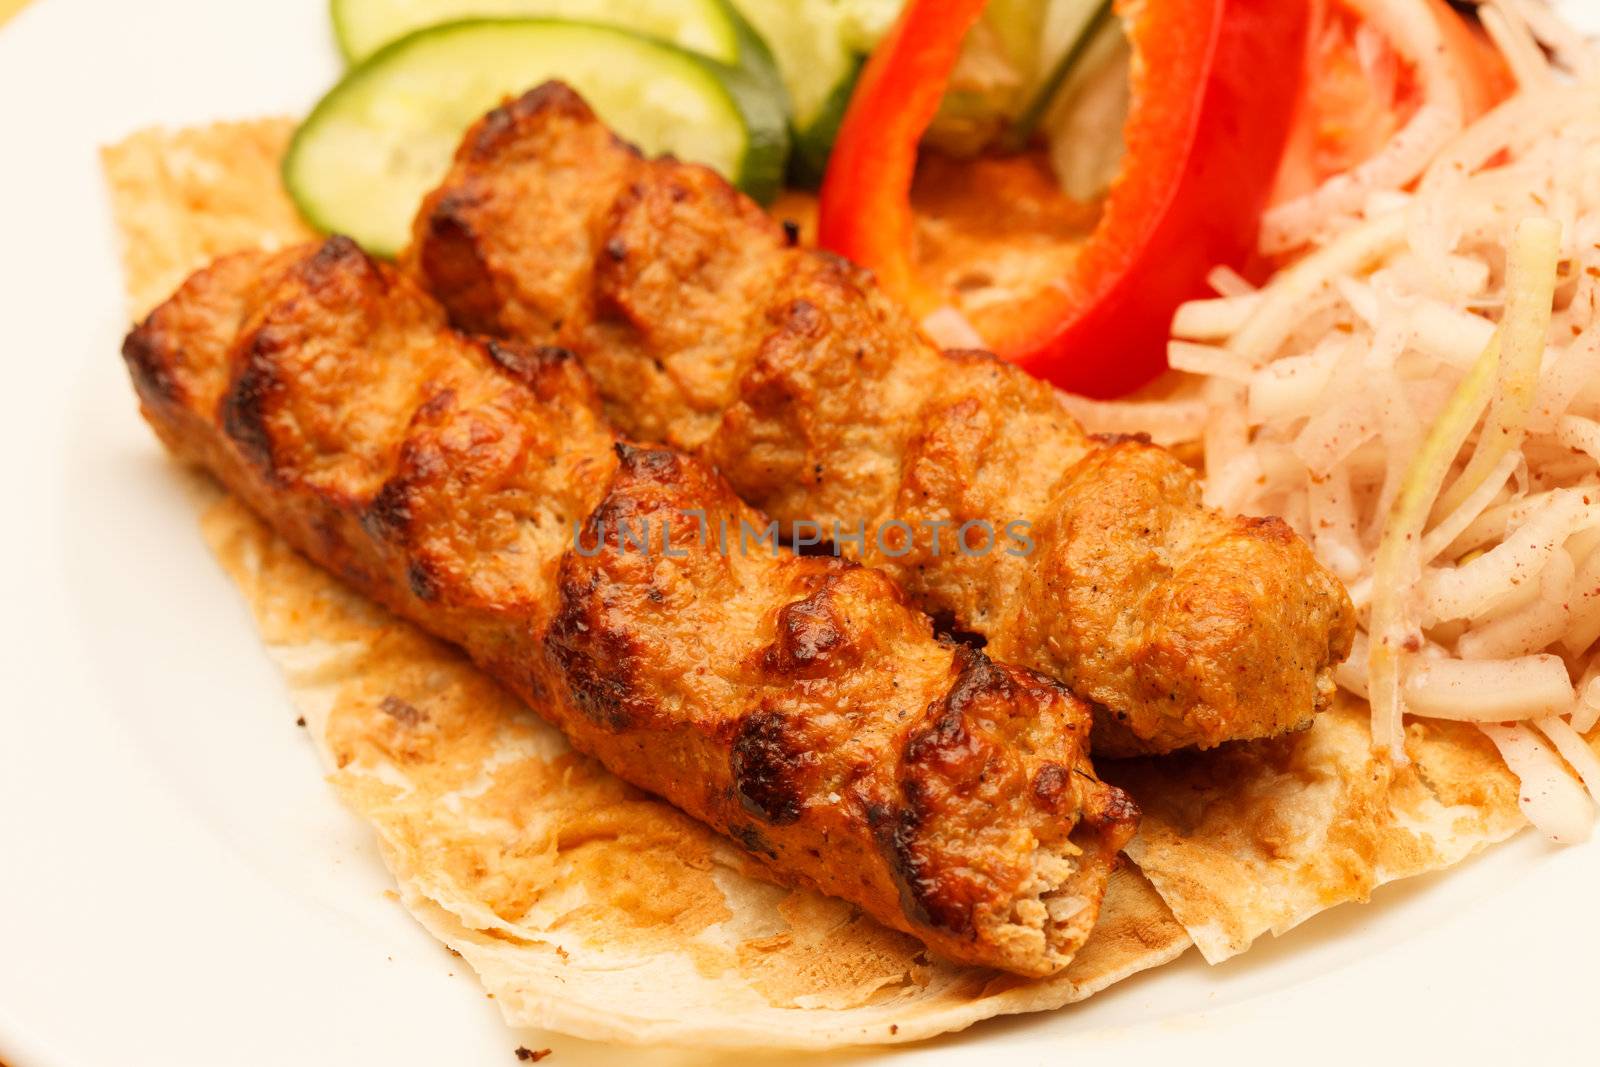 kebab with vegetables by shebeko